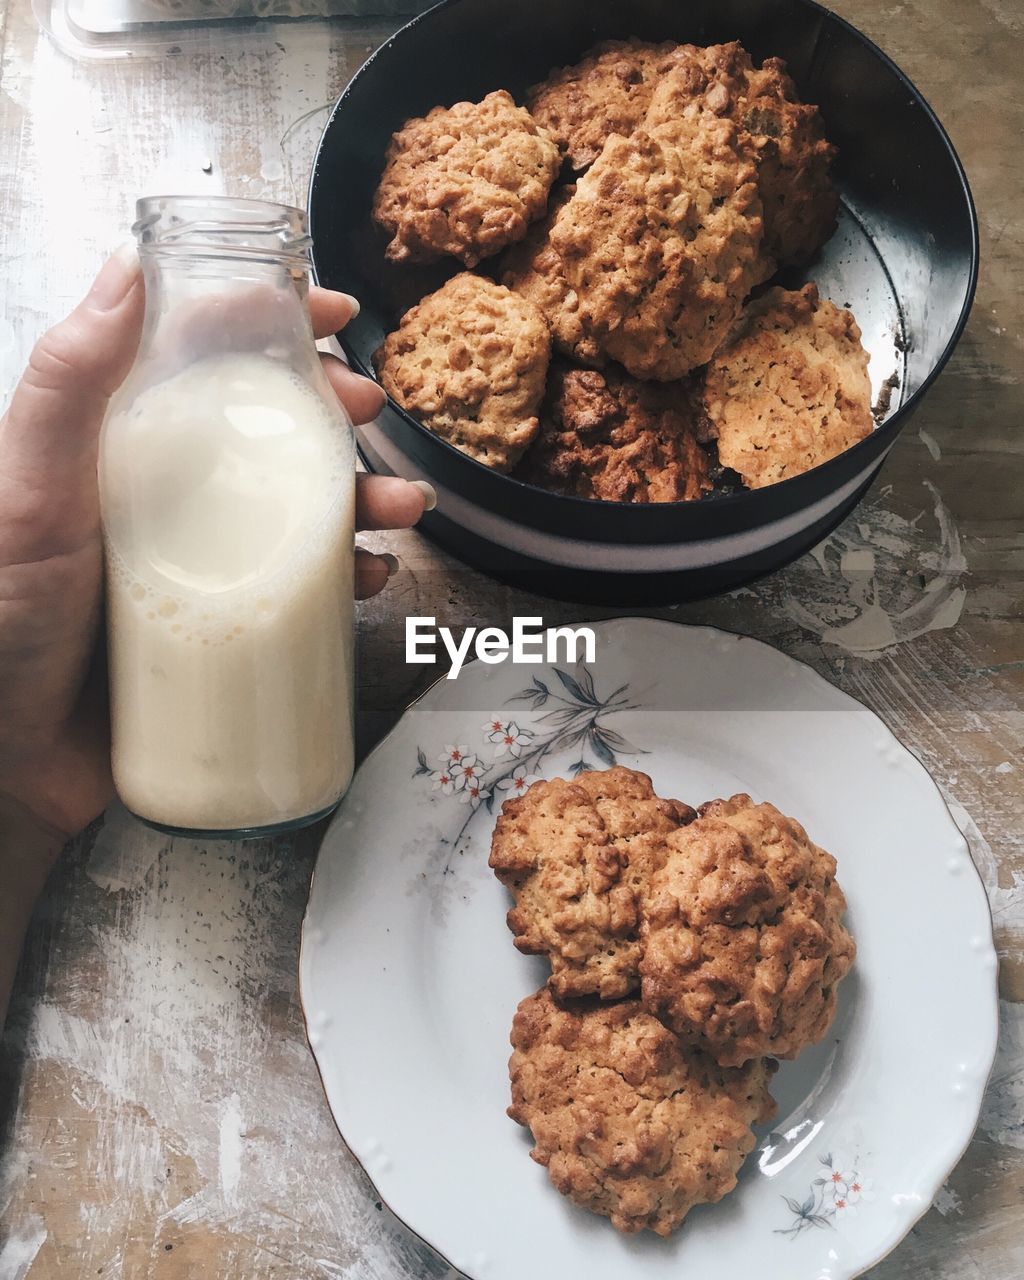 Cropped image of hand holding milk bottle by oatmeal cookies on table